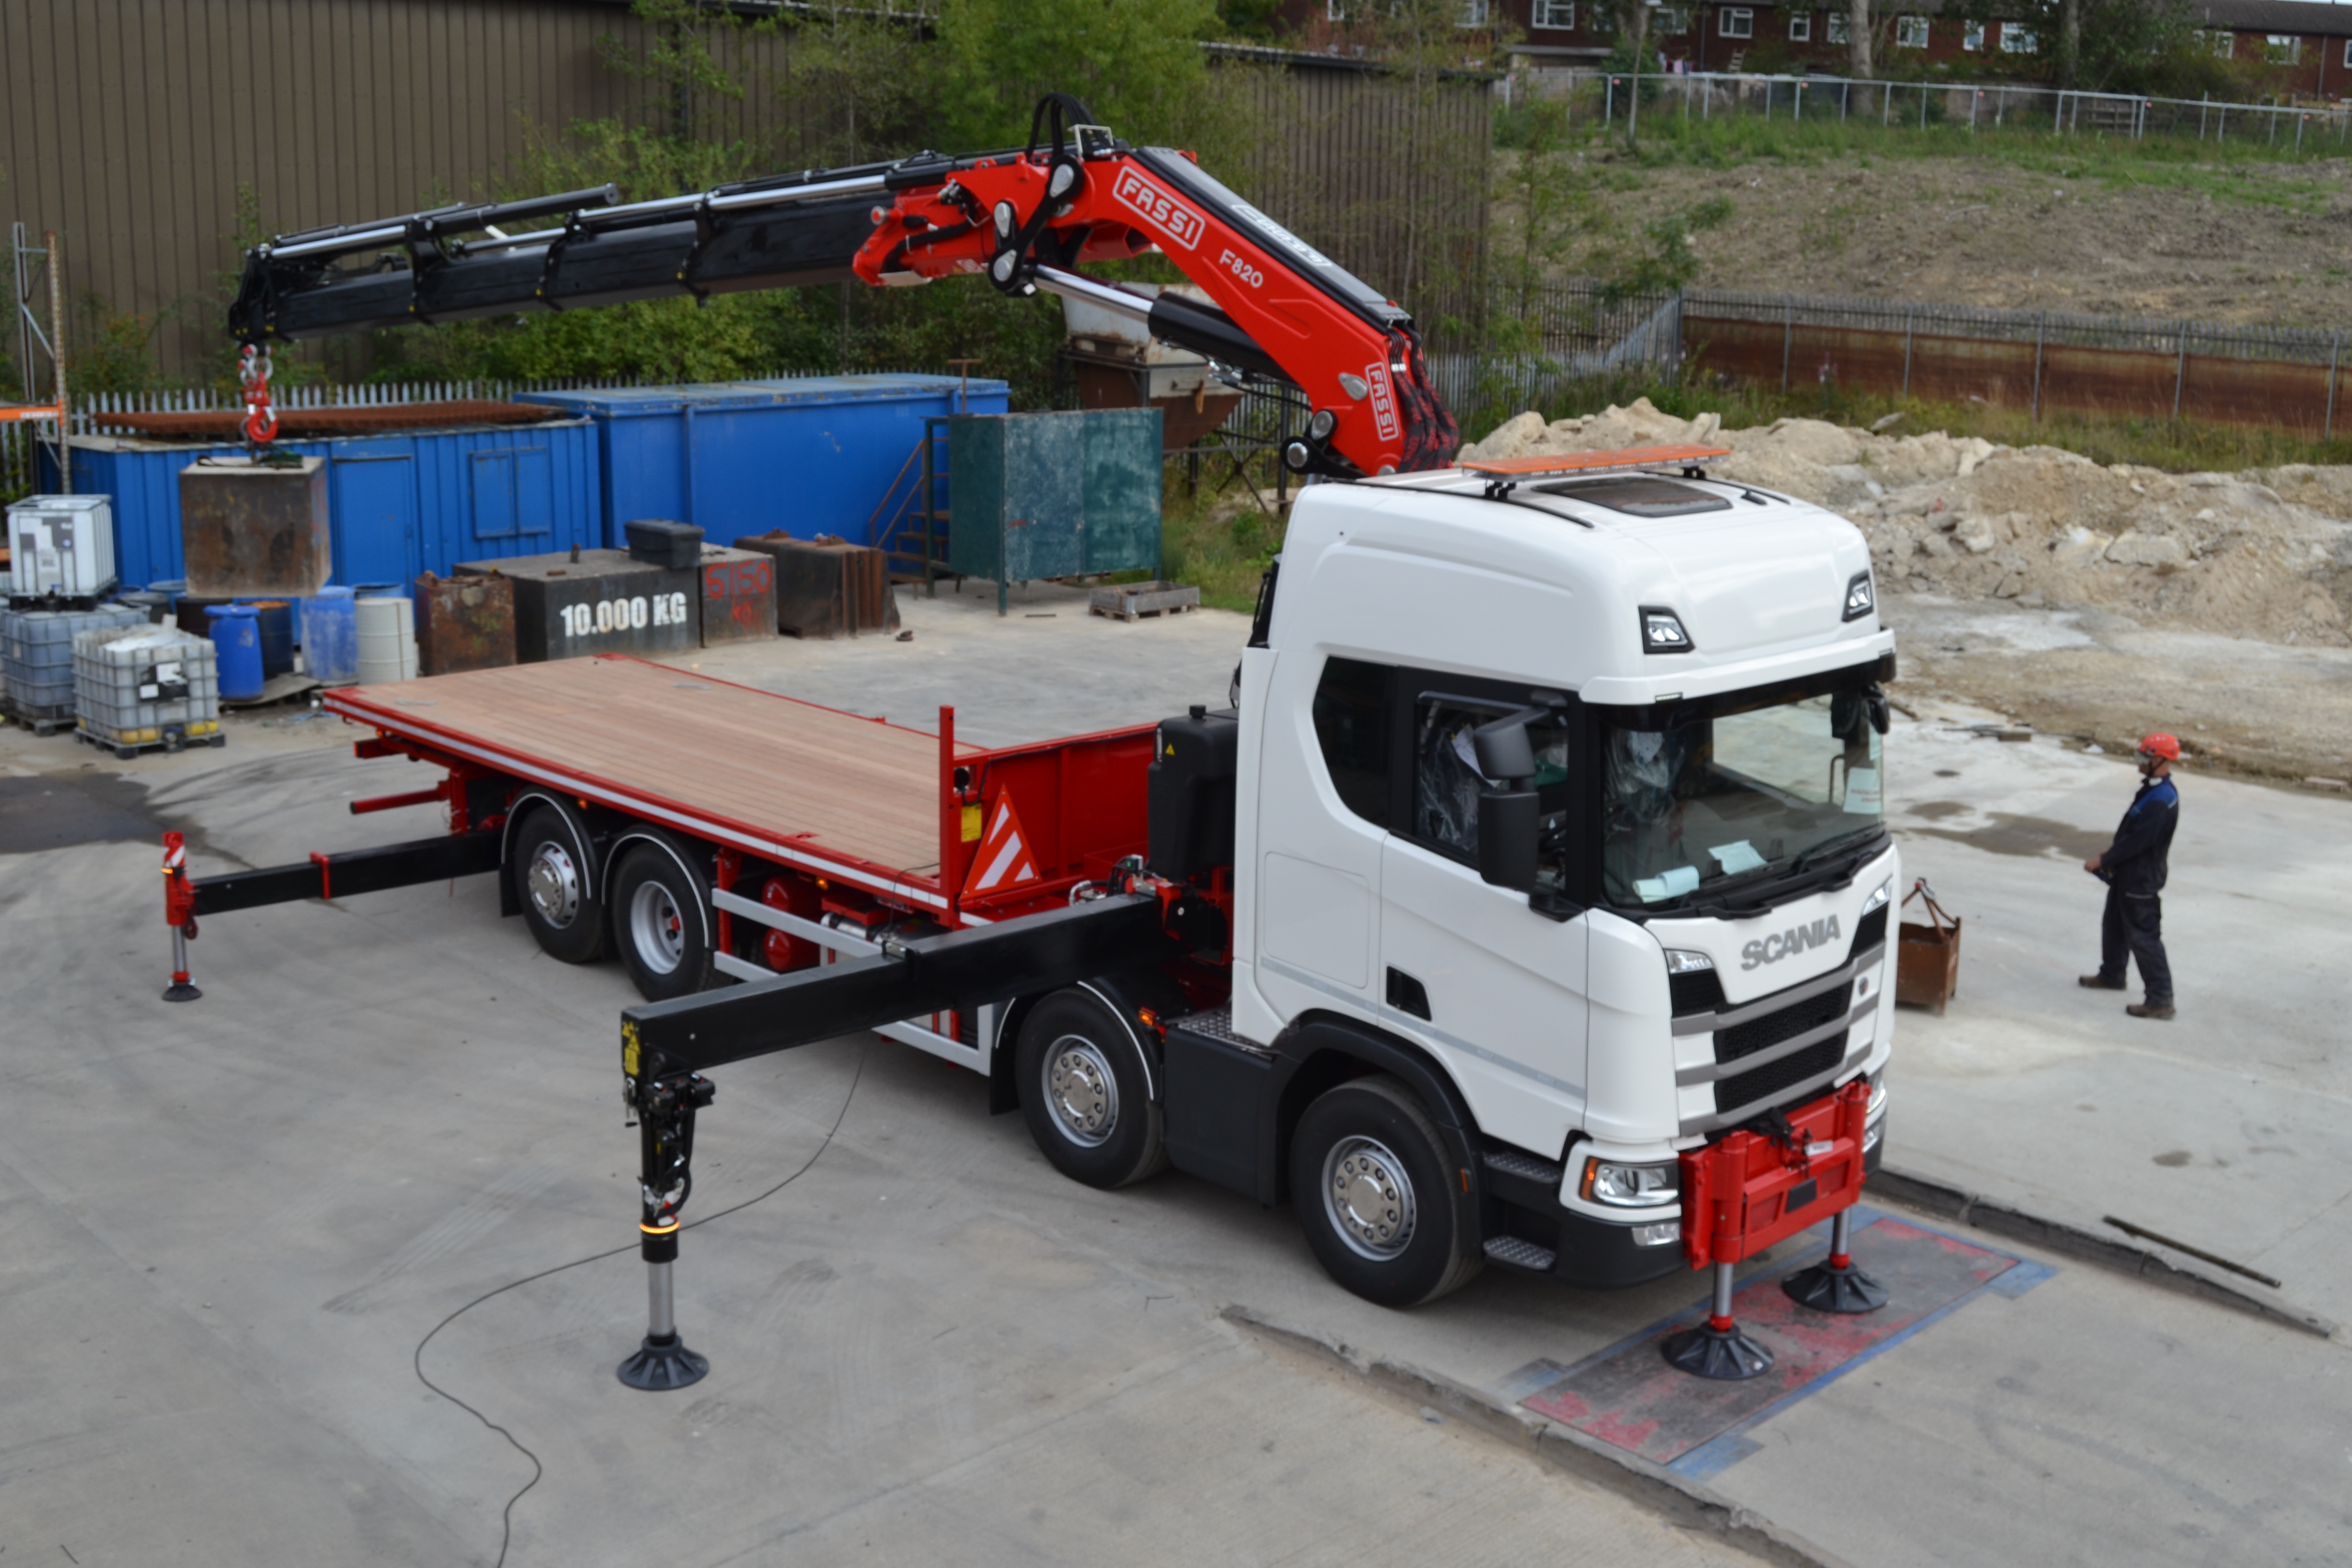 TWO MORE F820RA CRANES FOR DAVID STANLEY TRANSPORT